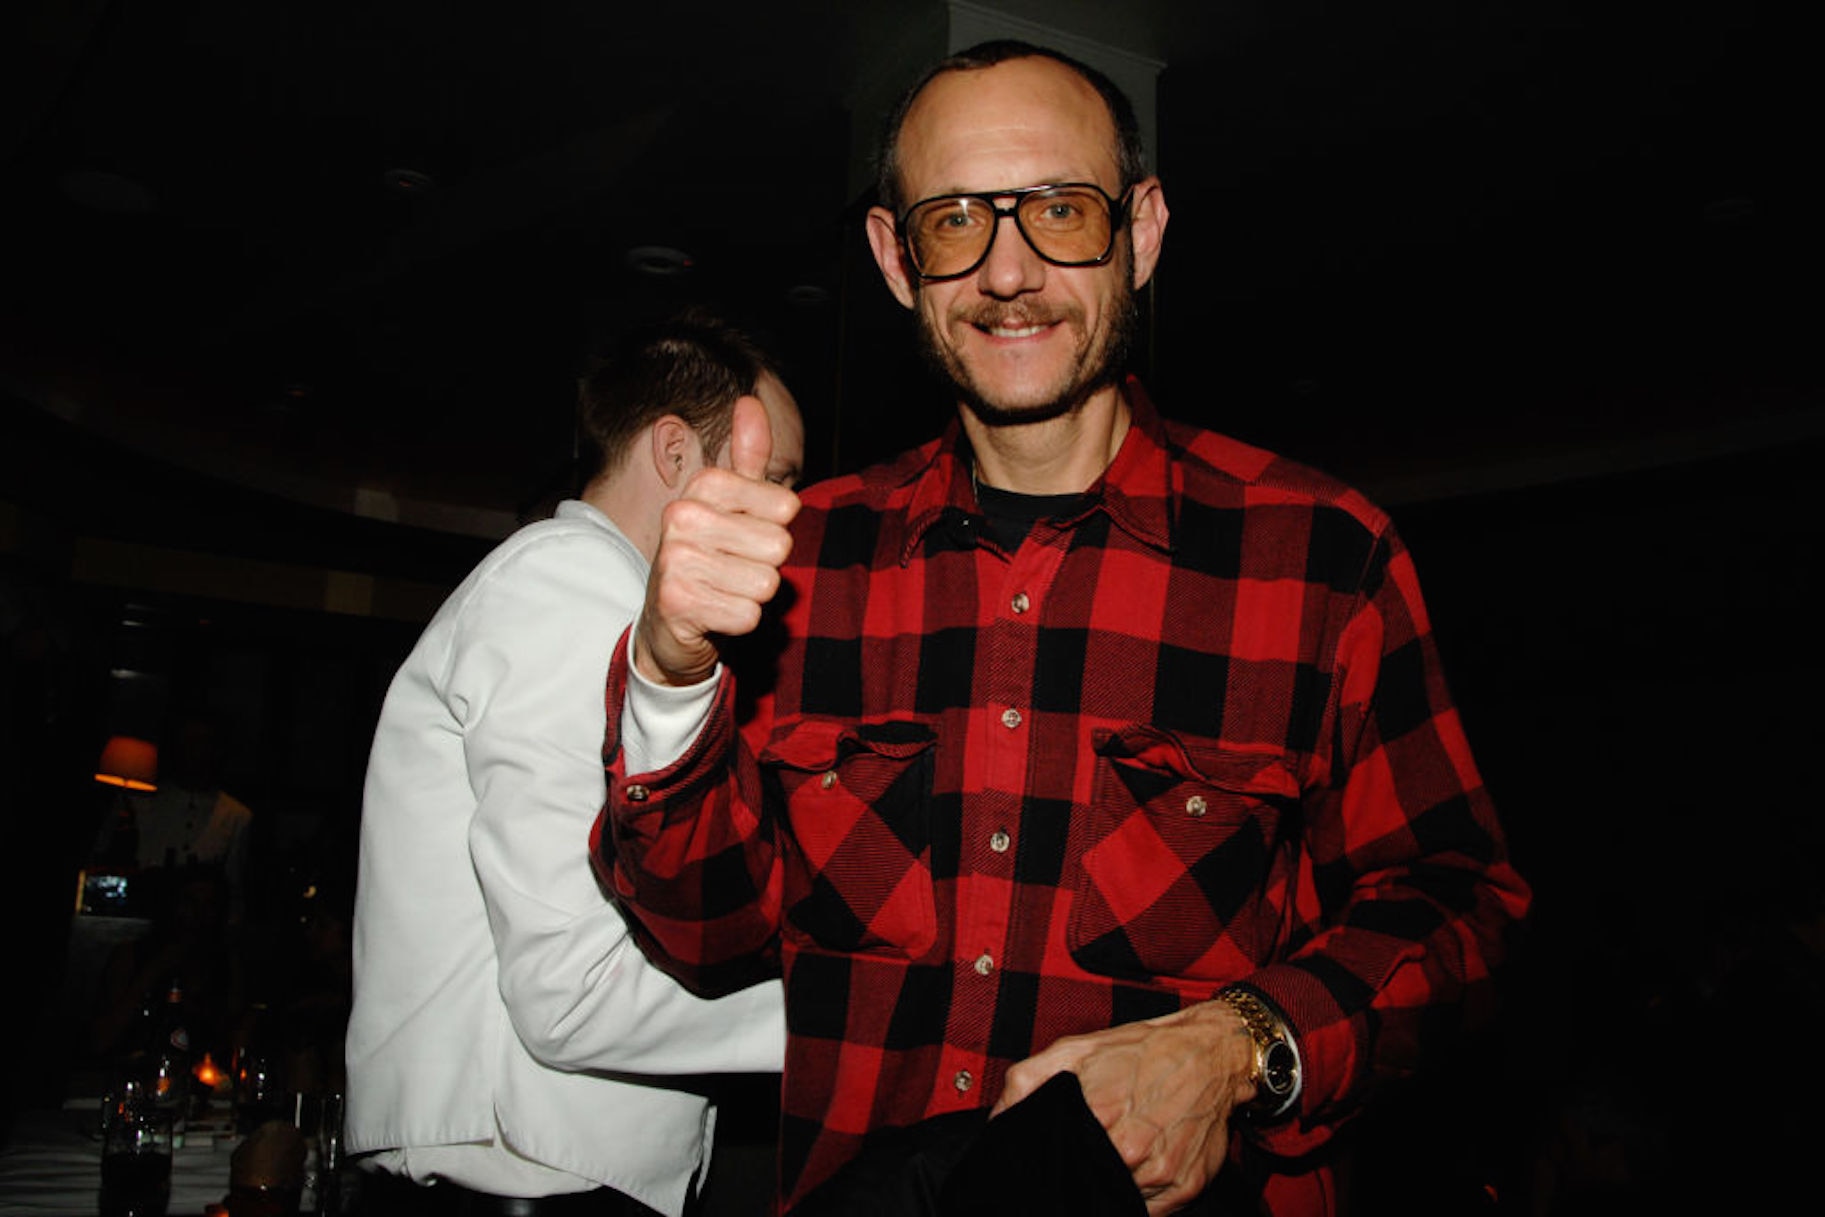 Top Fashion Photog Terry Richardson Banned From Major Magazines For 